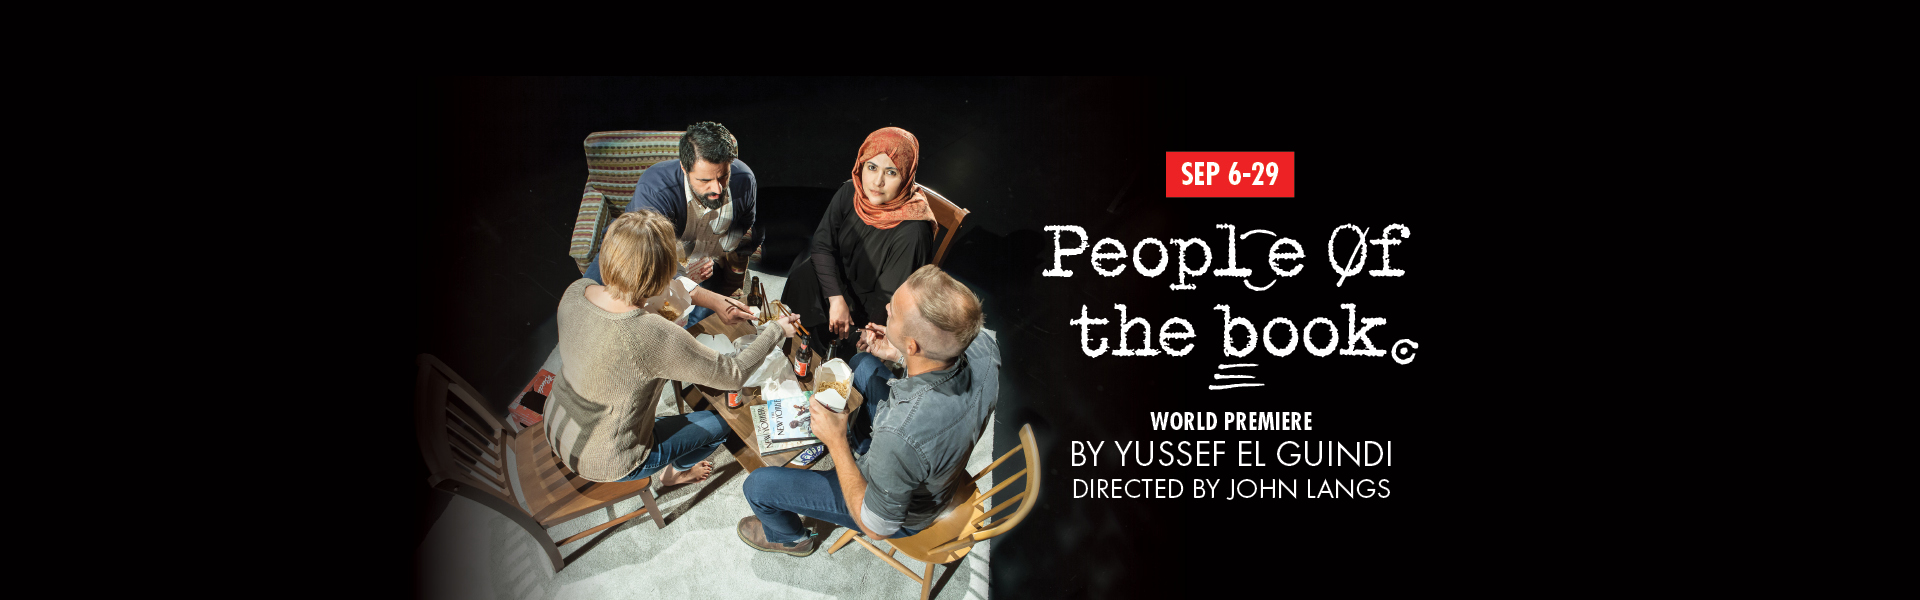 2019 People of the Book Banner Image